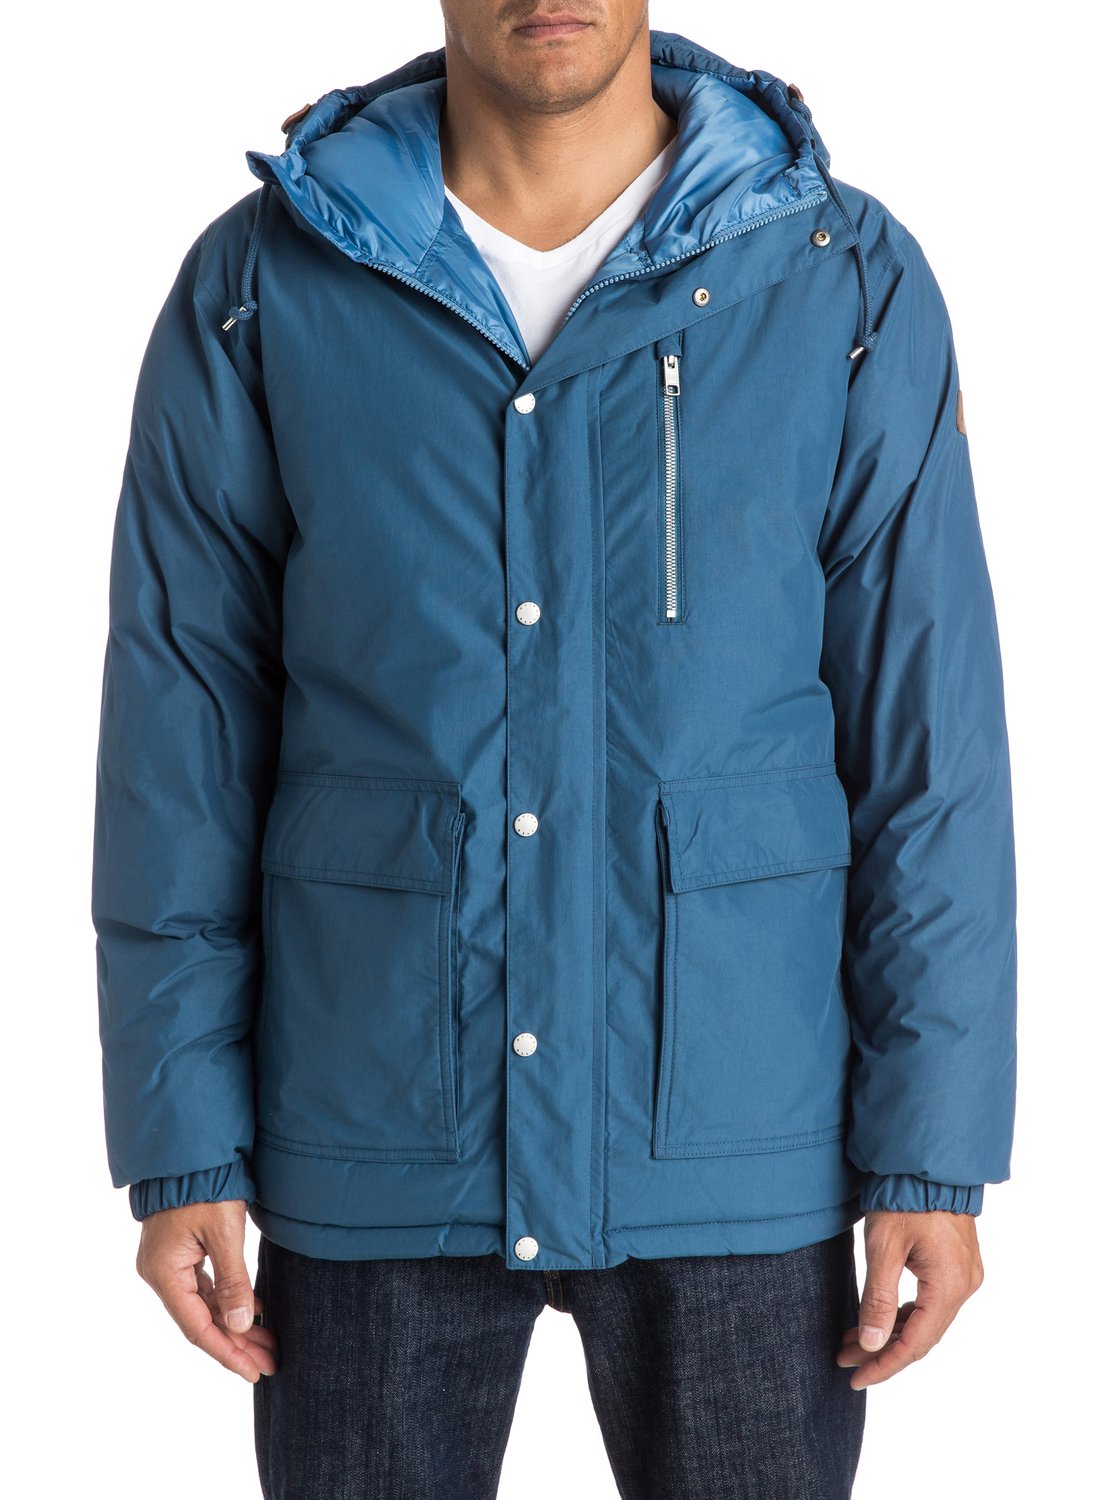 Role Reversible 10K Cold Weather Jacket 888701470281 | Quiksilver